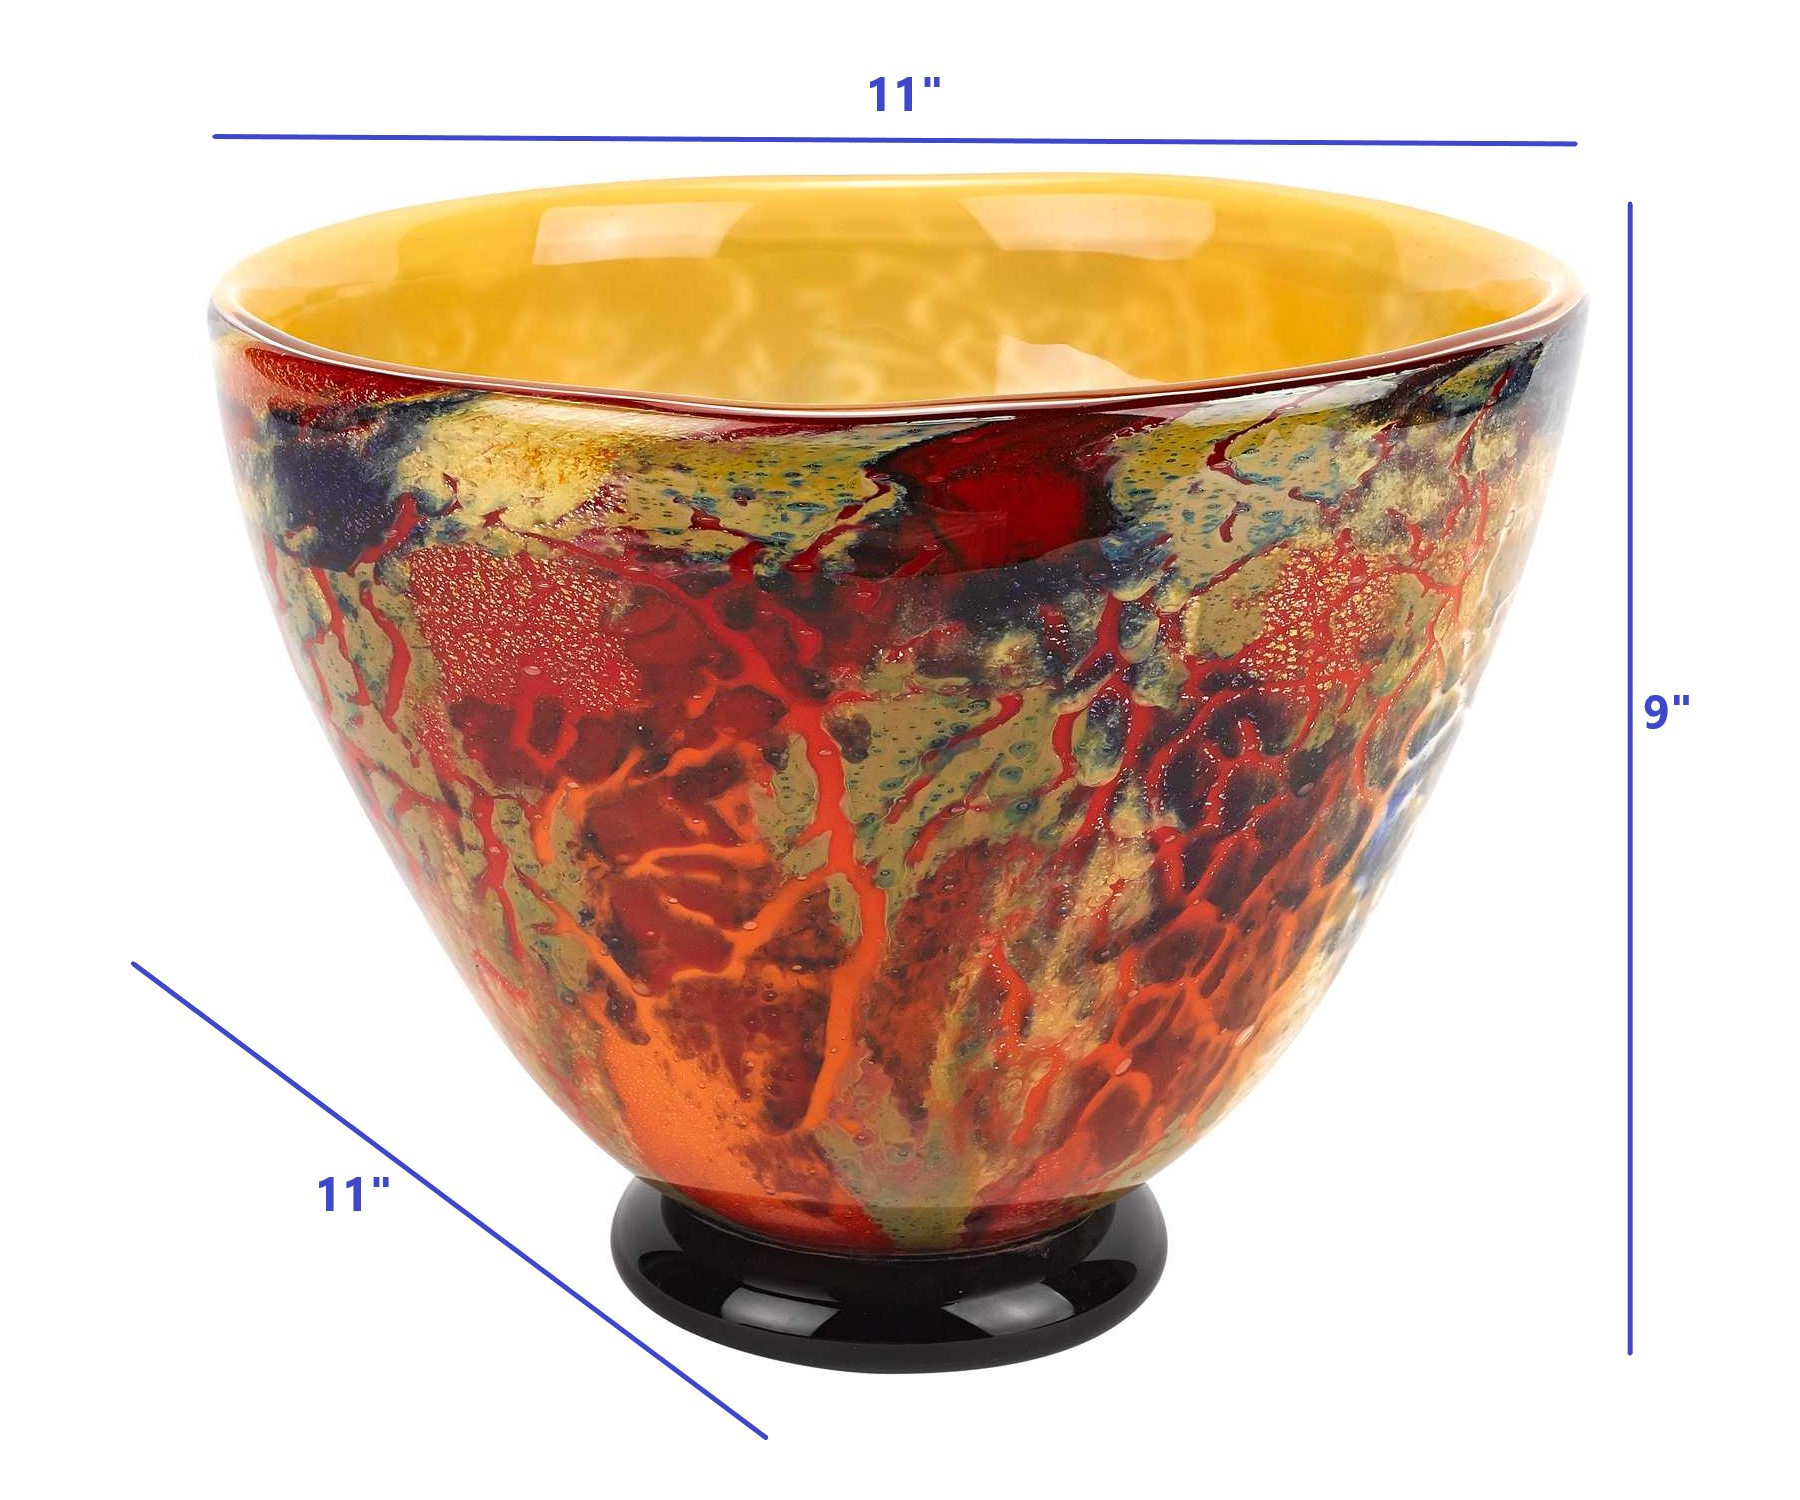 11" Mouth Blown Art Glass Centerpiece or Punch Bowl